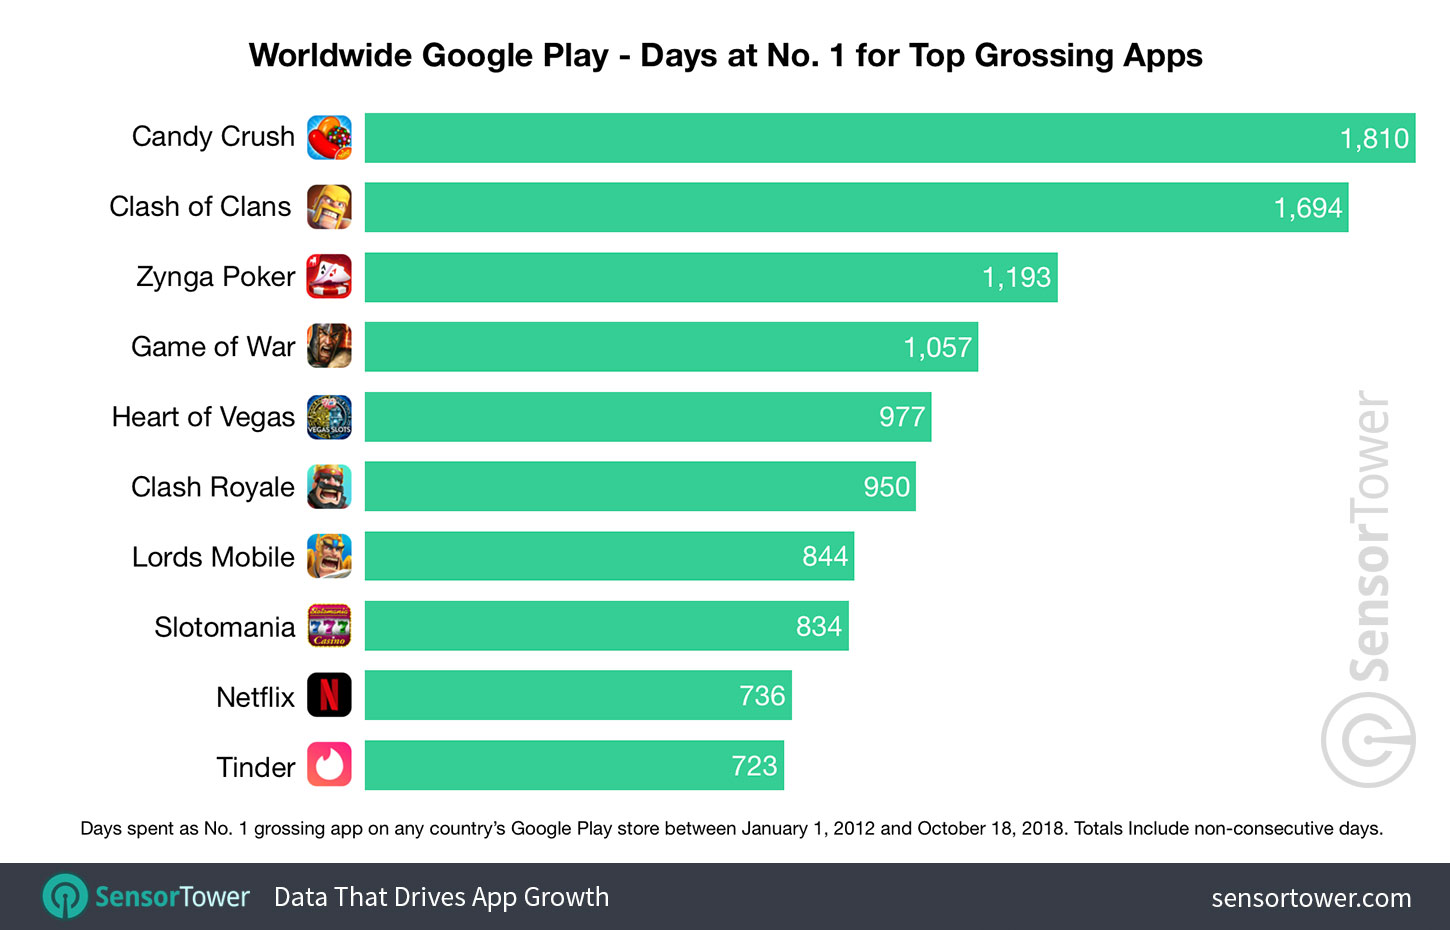 Chart showing a ranking of apps by number of days spent as No. 1 top grossing app on the Worldwide Google Play store